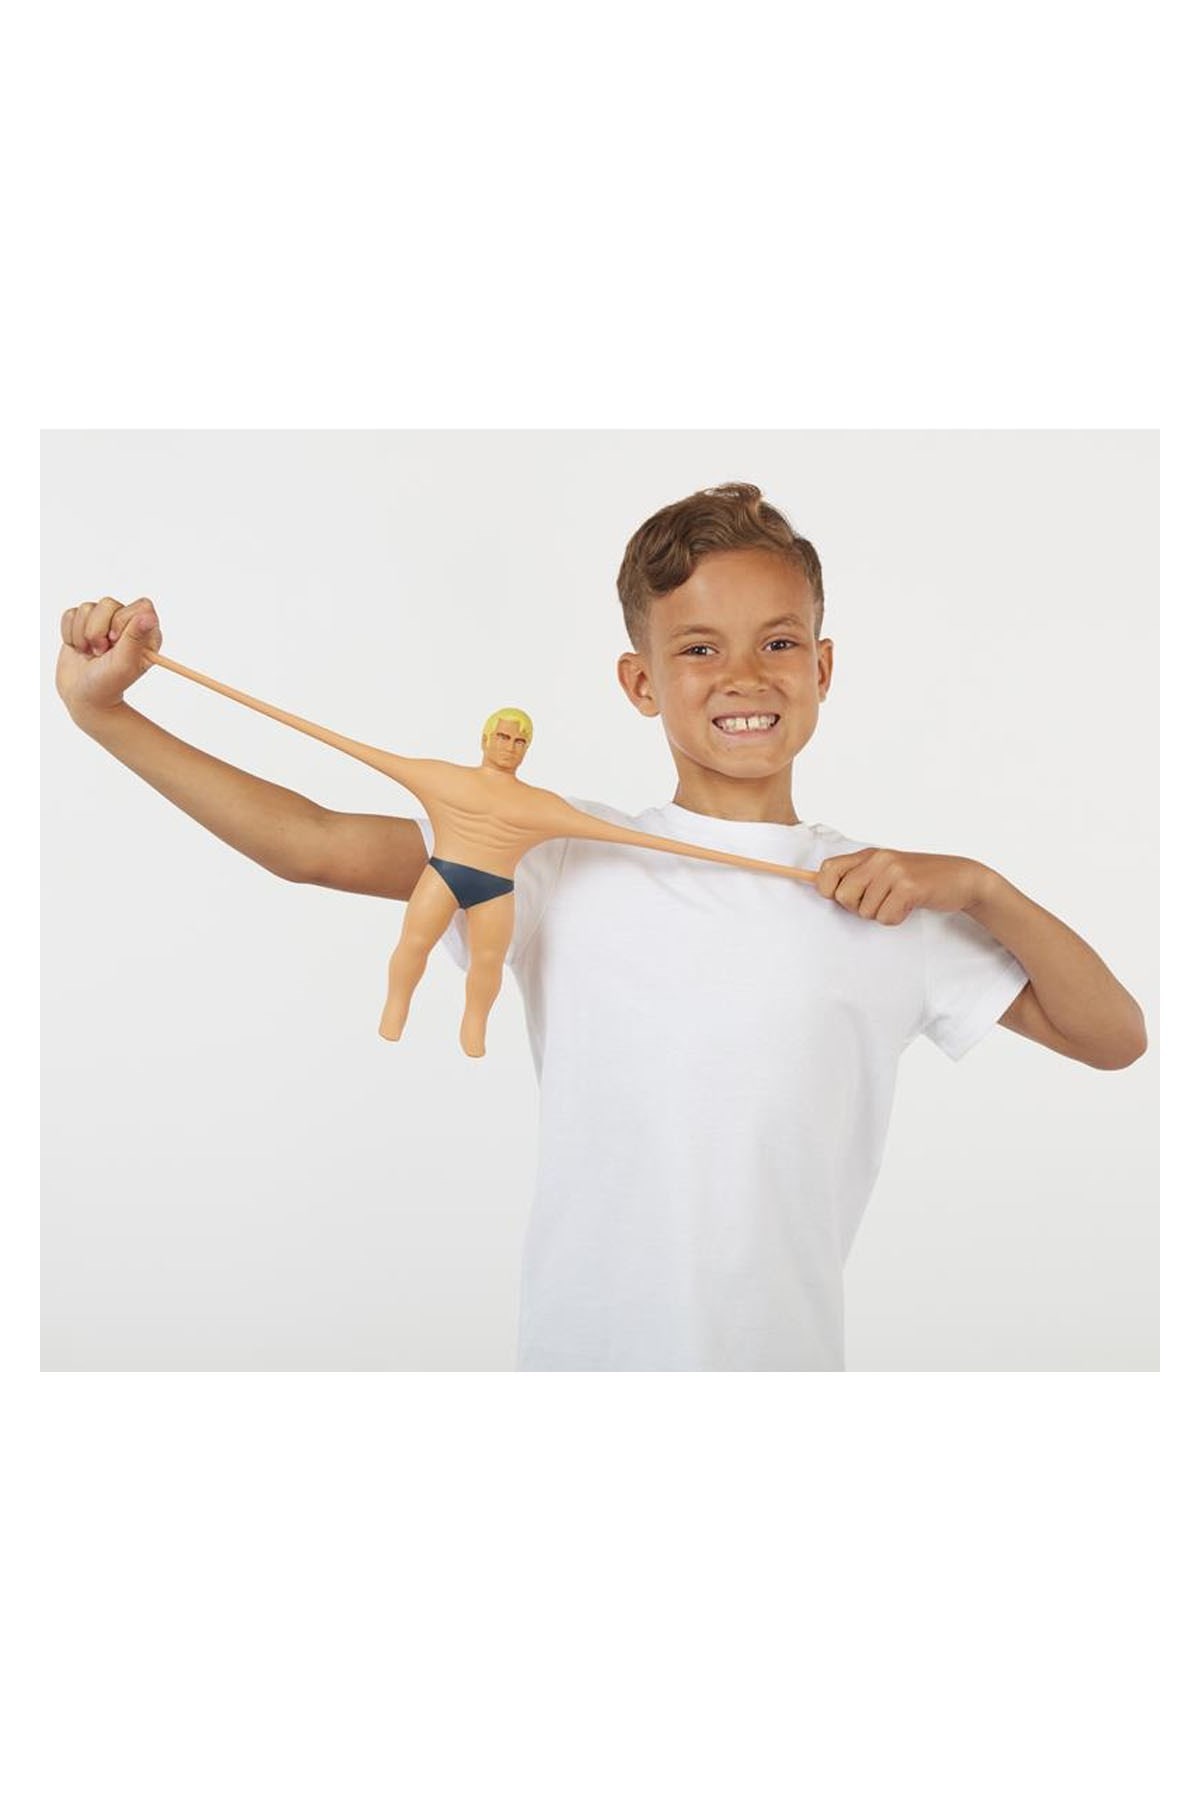 Stretch Armstrong 07743